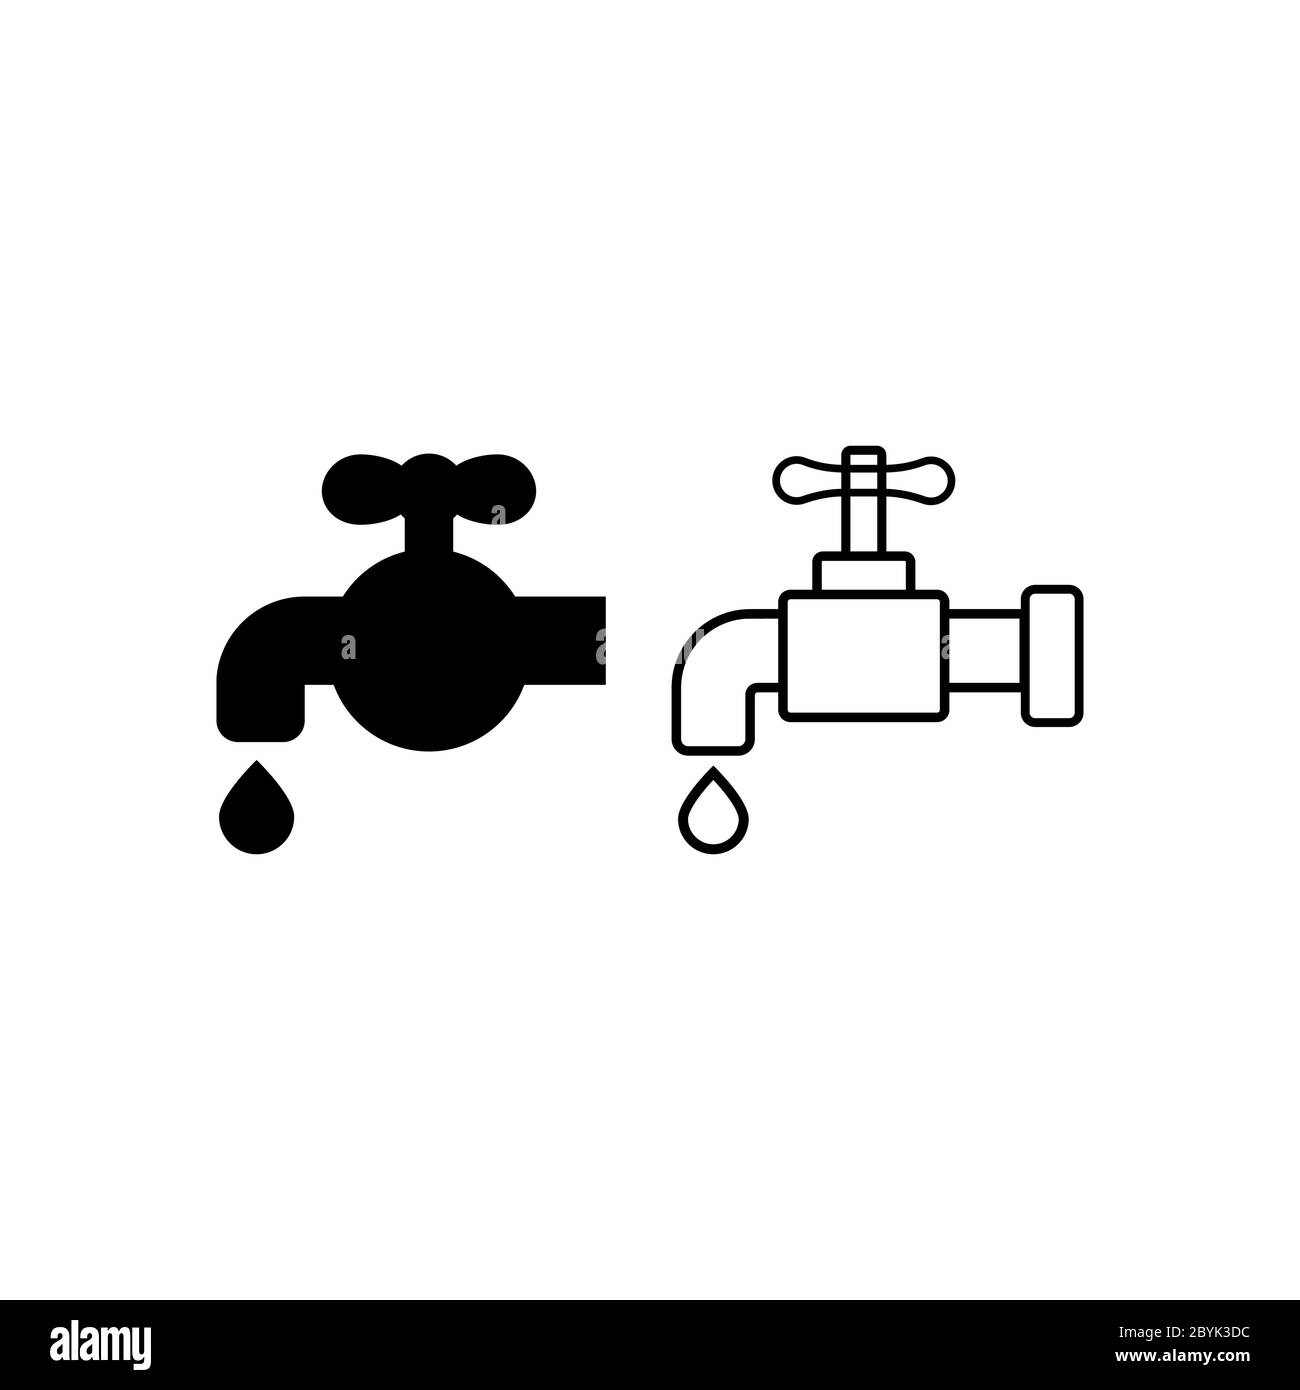 Water tap icon flat logo in black and white on isolated white background. EPS 10 vector Stock Vector